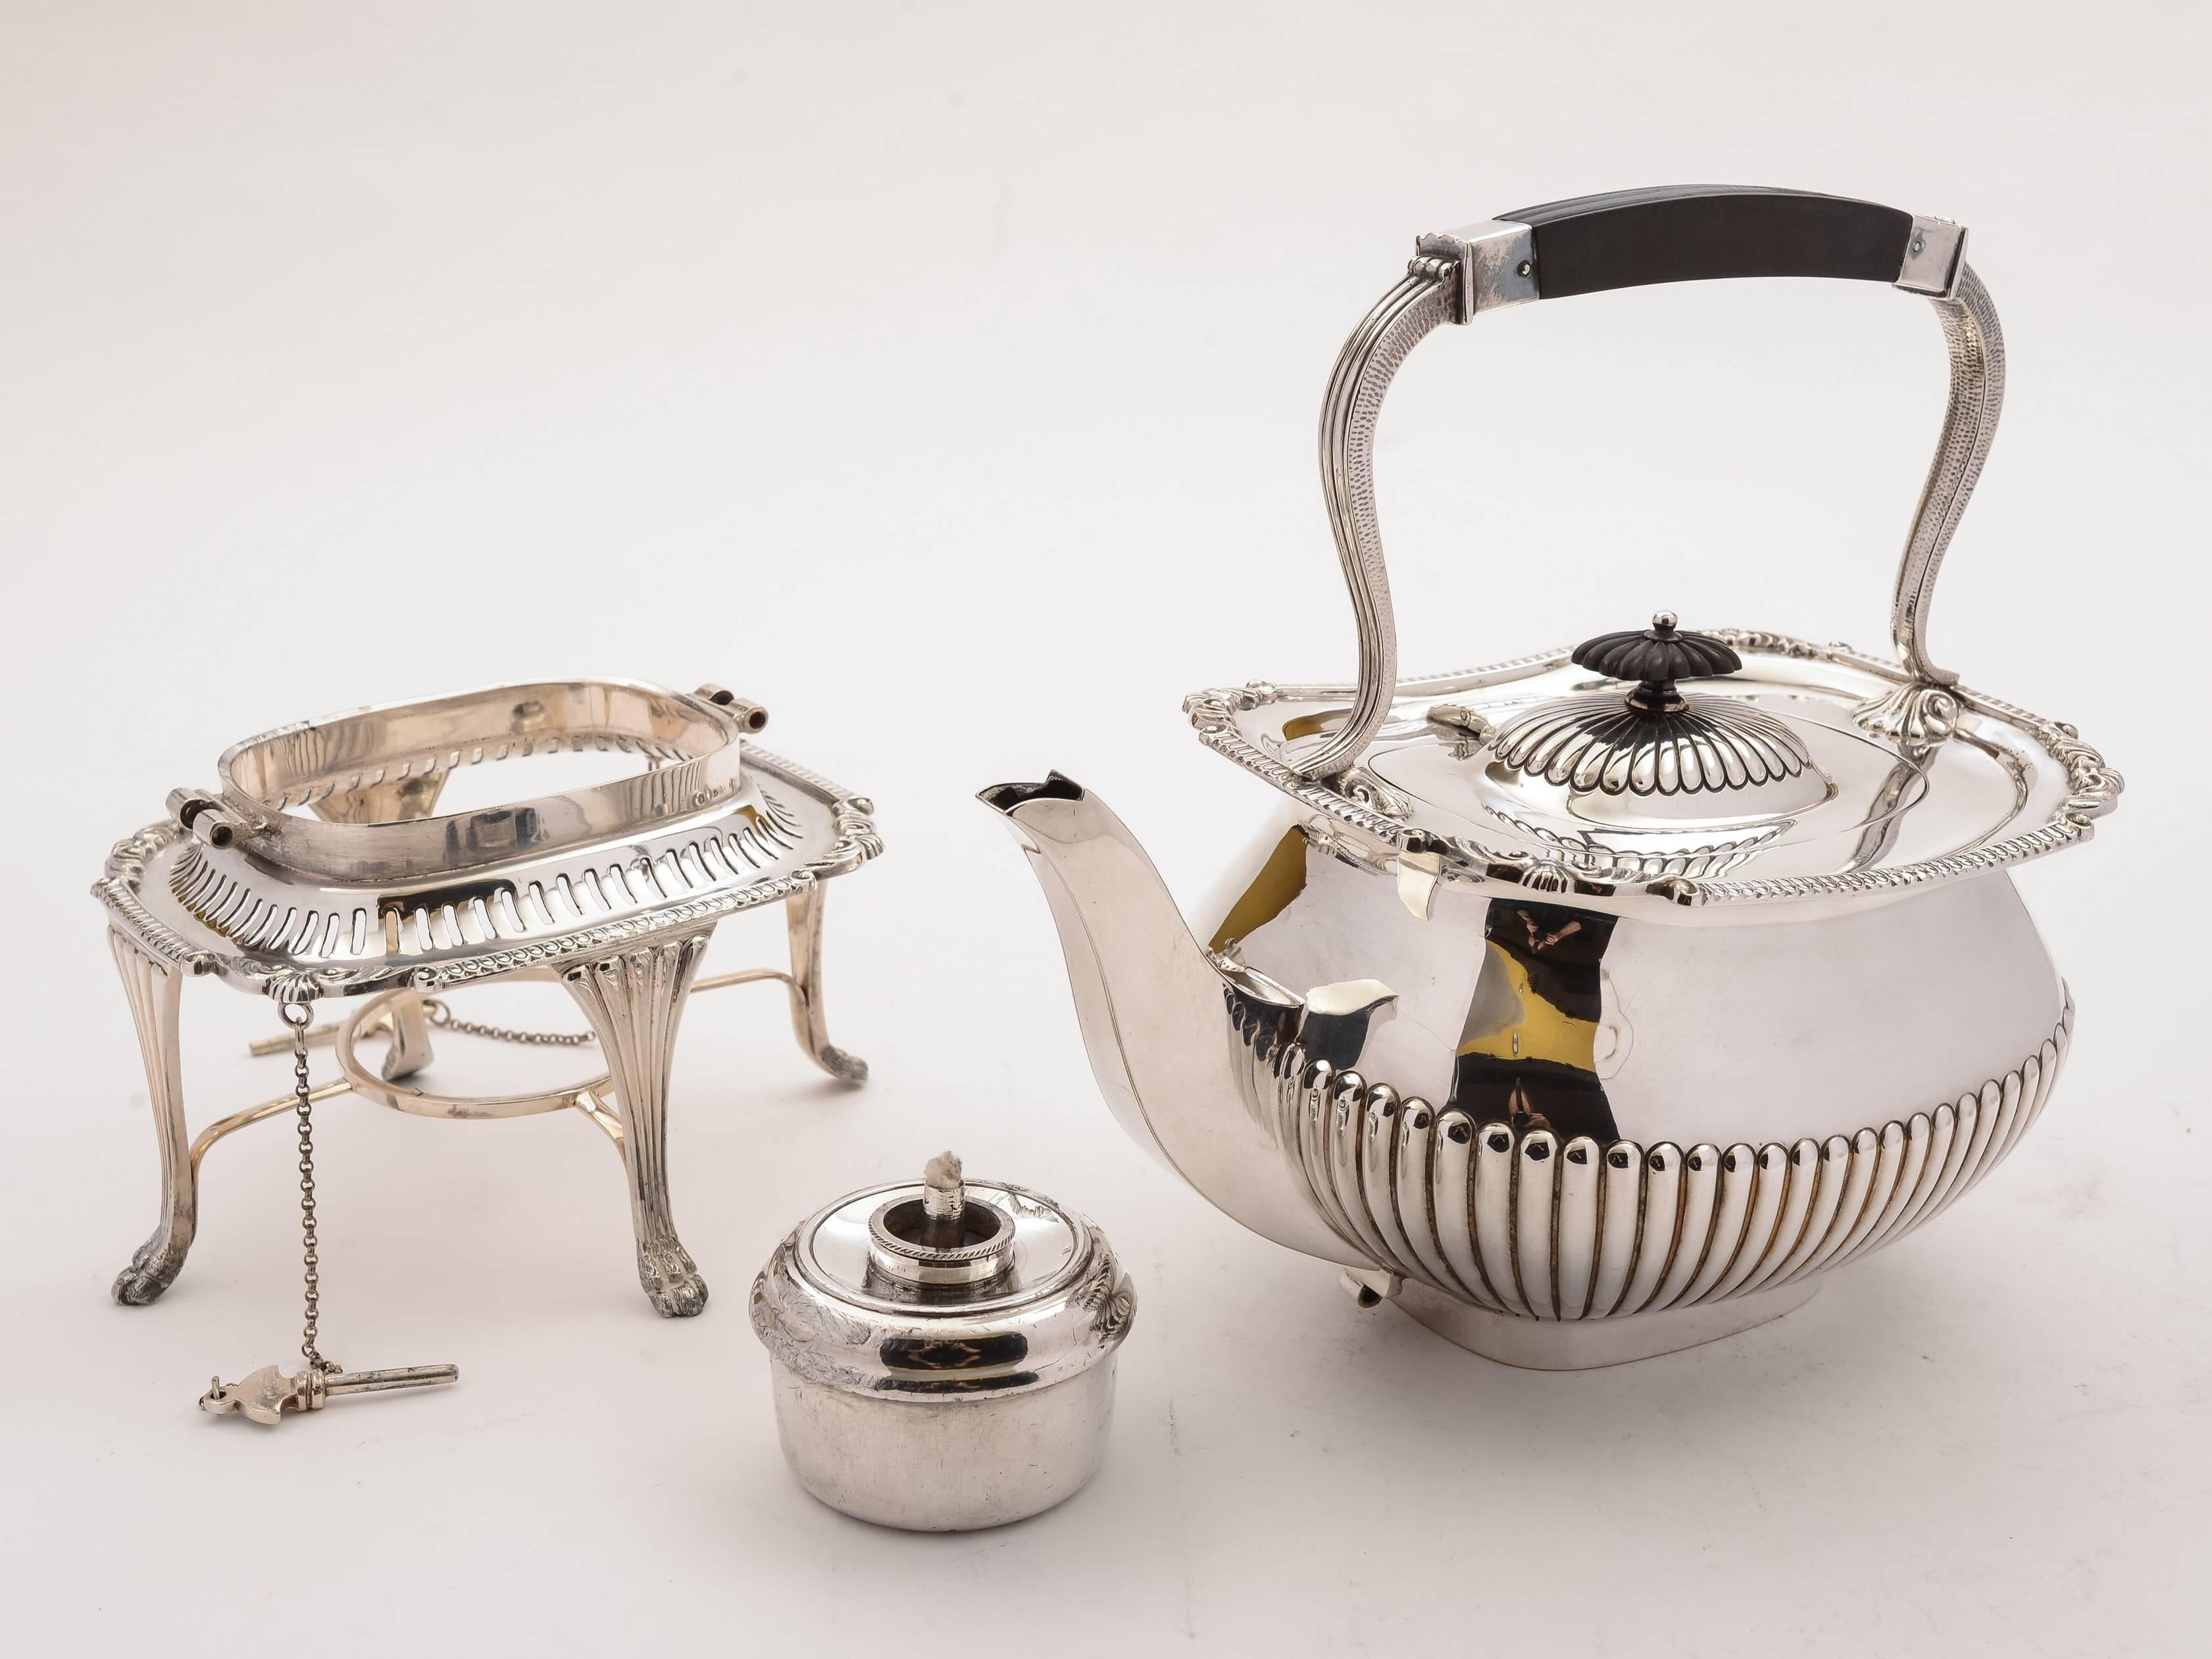 English Edwardian Large Silver Plated Kettle on Stand, circa 1905